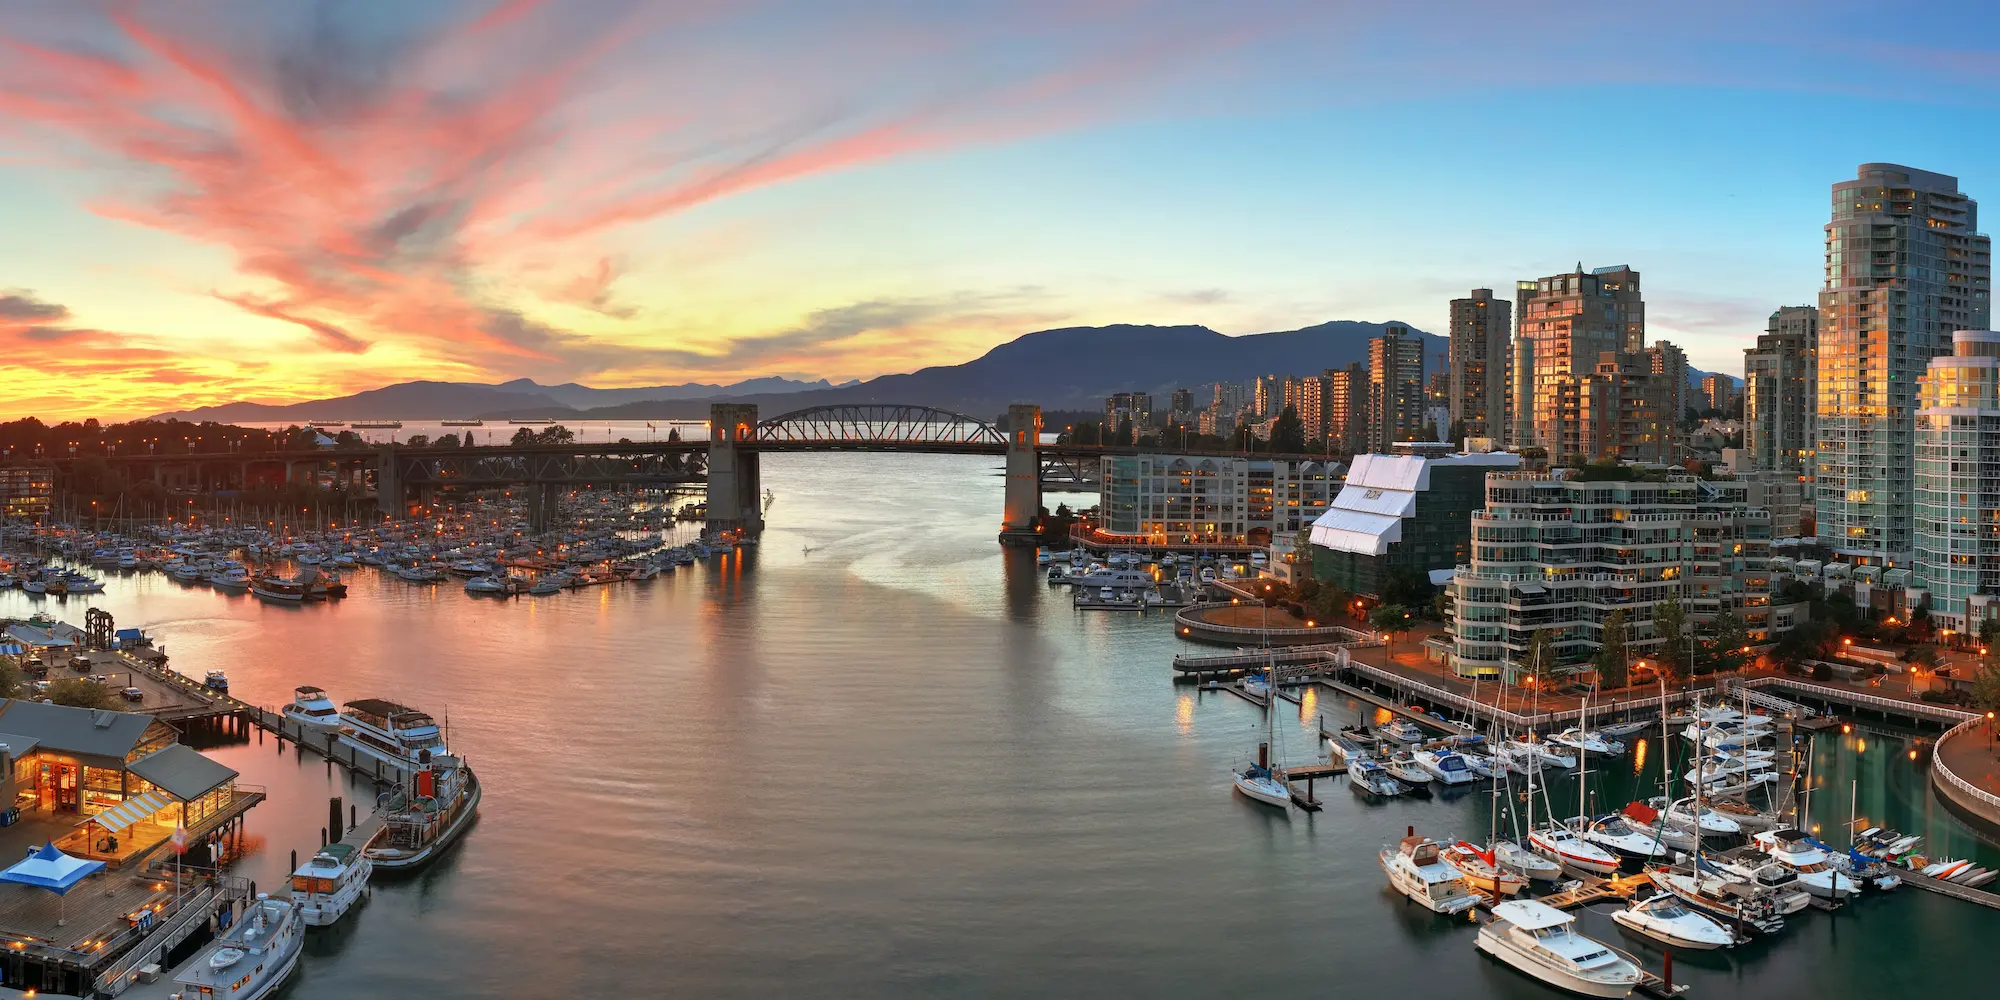 Sunset shining down on beautiful yachts around Vancouver BC